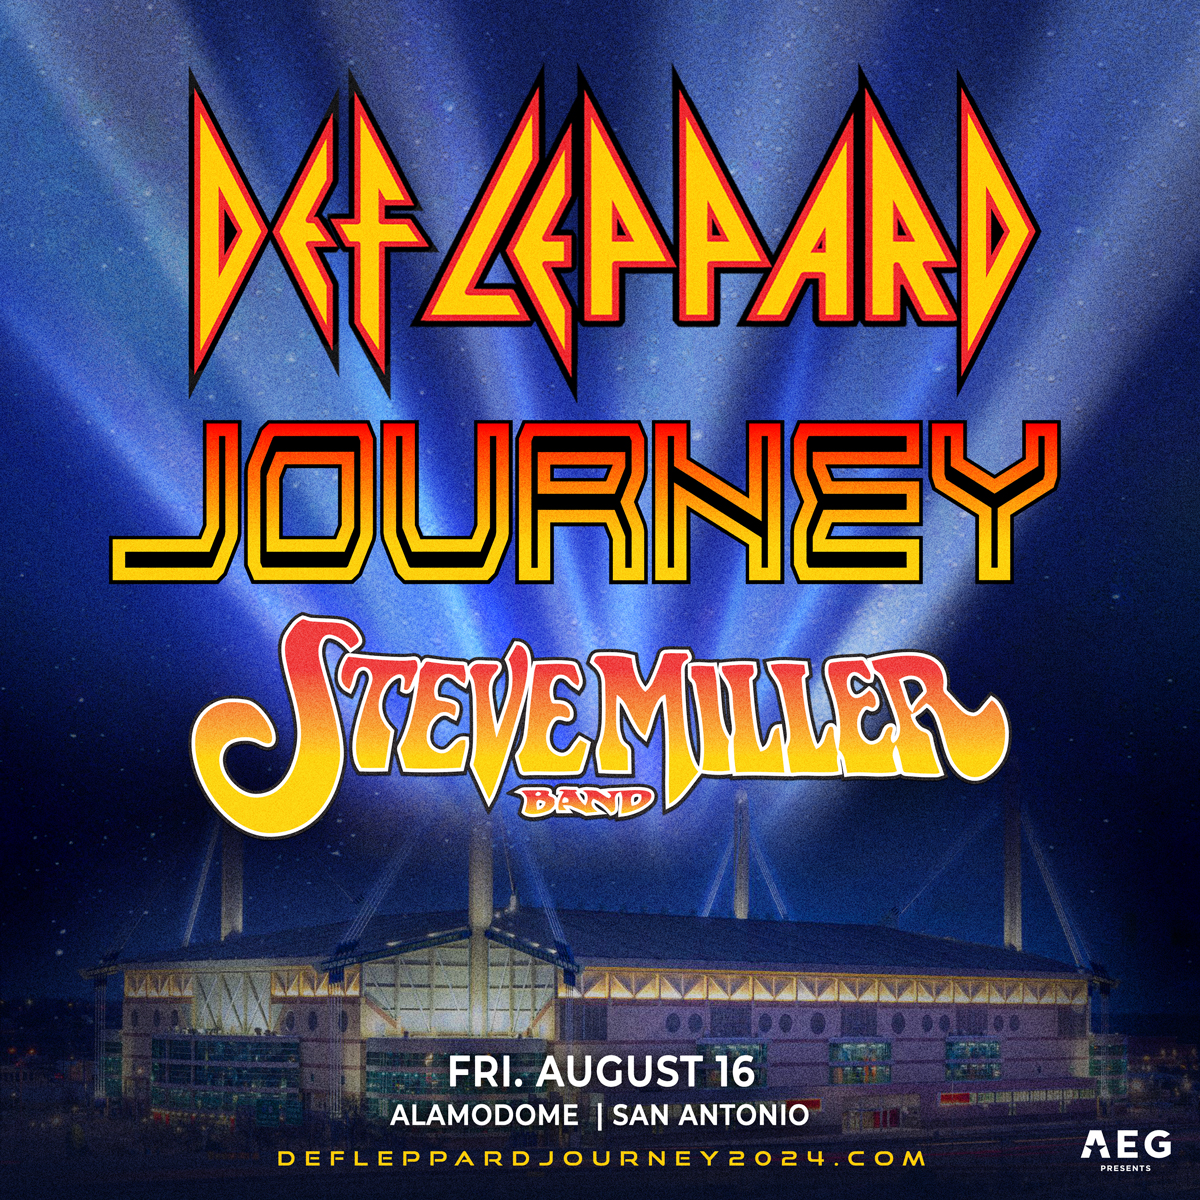 Def Leppard, Journey, joined by Steve Miller Band. Three legendary bands = ONE EPIC NIGHT! 🤘 Friday, Aug. 16. Tickets ON SALE NOW at the box office and online. ⭐ 🎟 ticketmaster.com or Alamodome Box Office Mon. - Fri. 10AM - 4PM